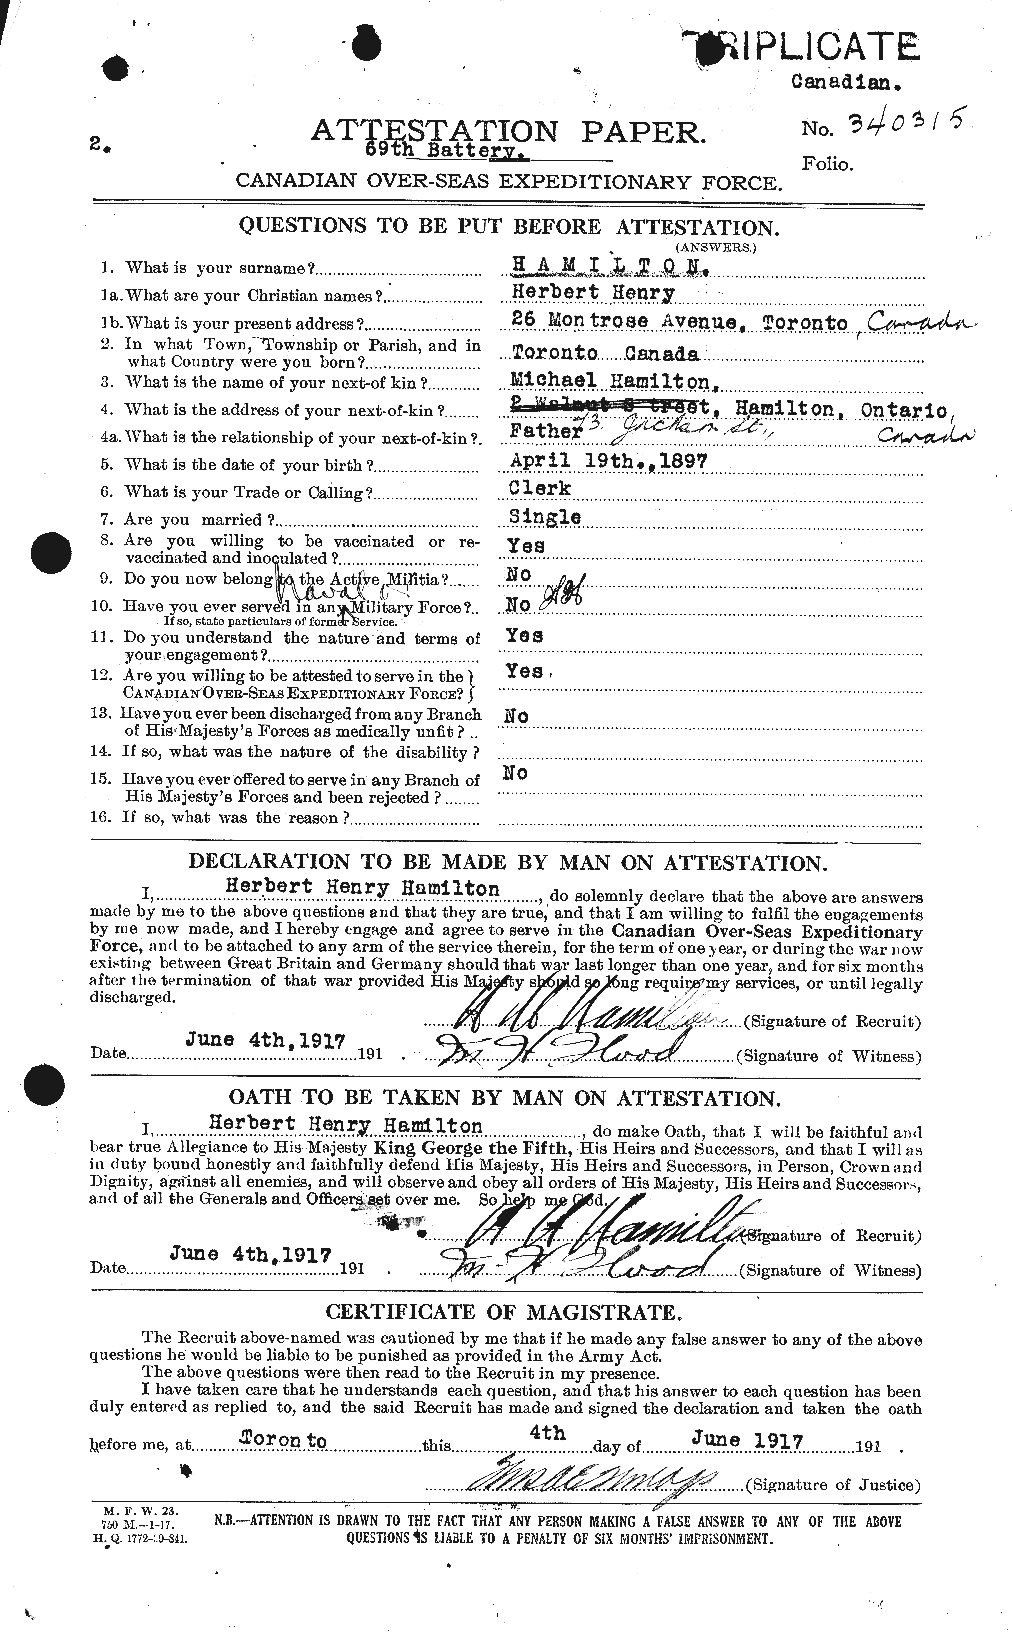 Personnel Records of the First World War - CEF 372907a